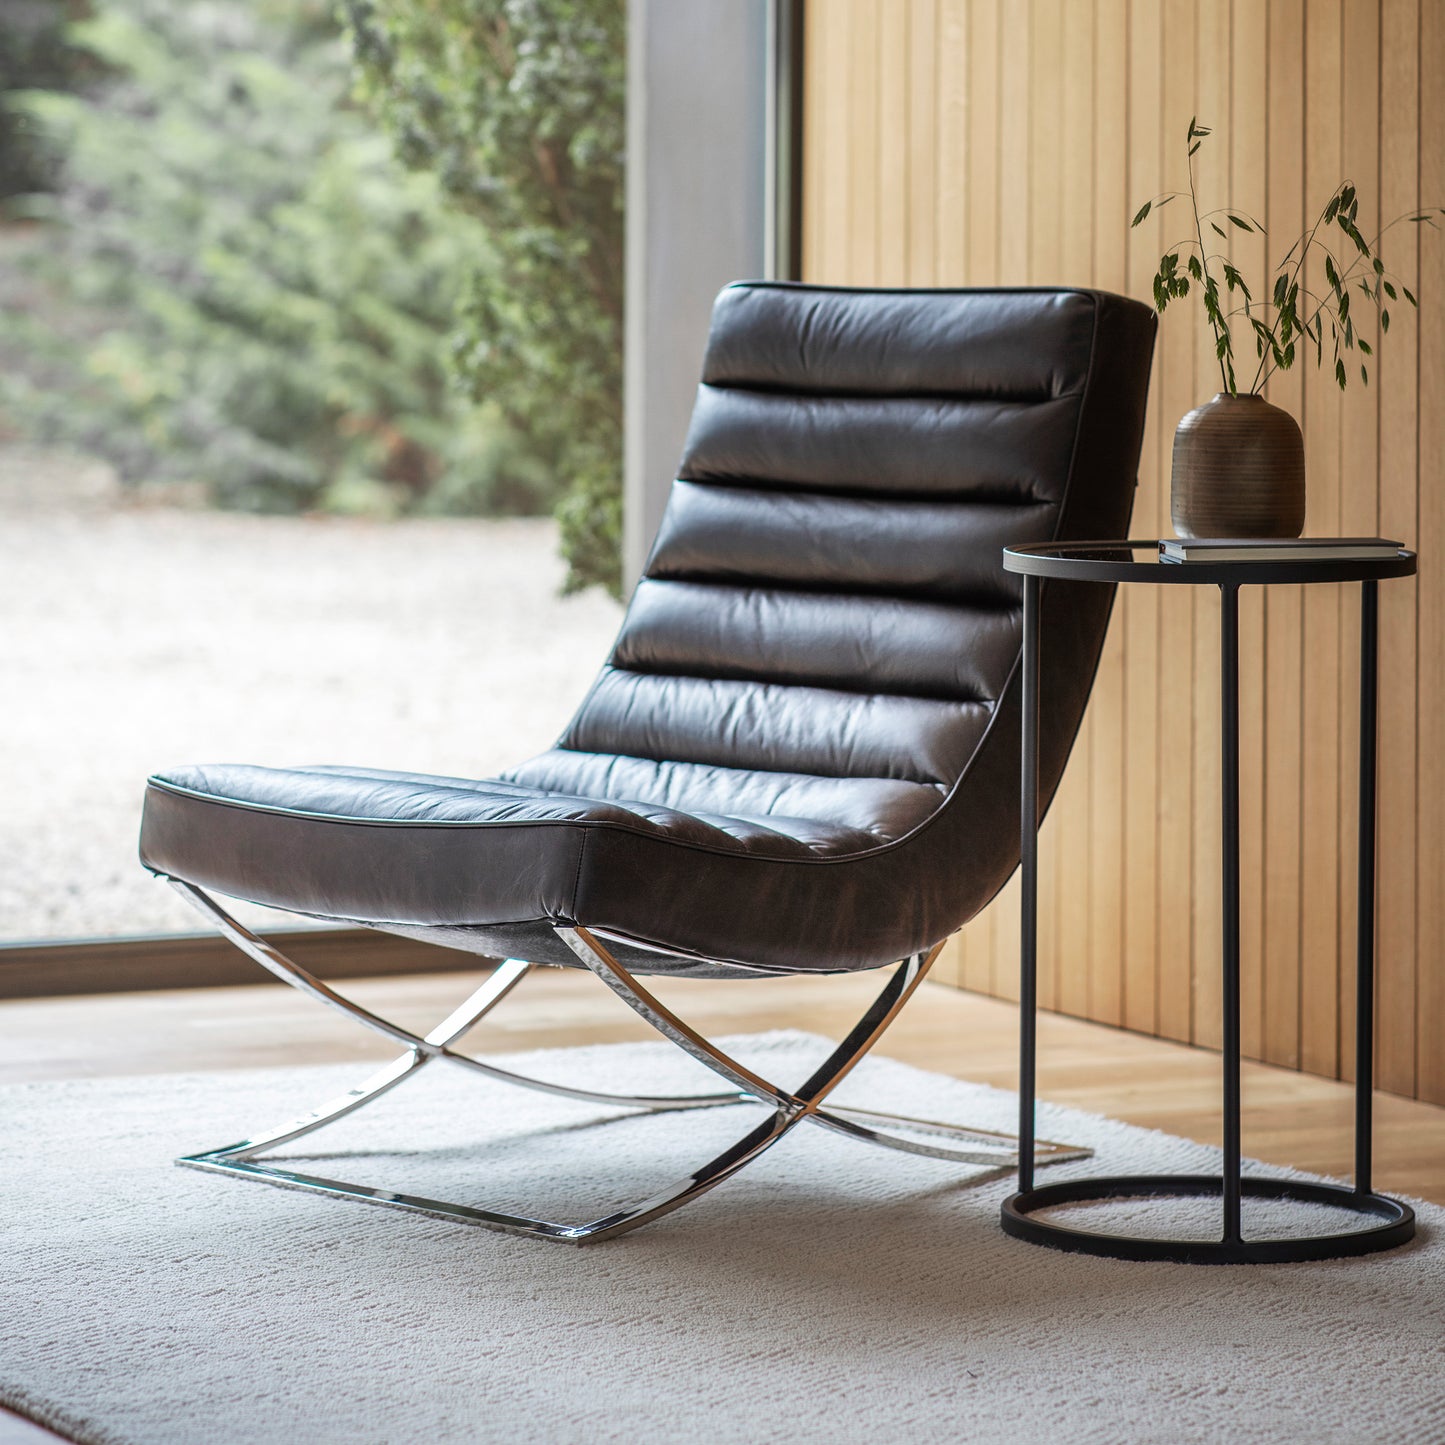 A black leather lounger from Kikiathome.co.uk placed in front of a window as home furniture.